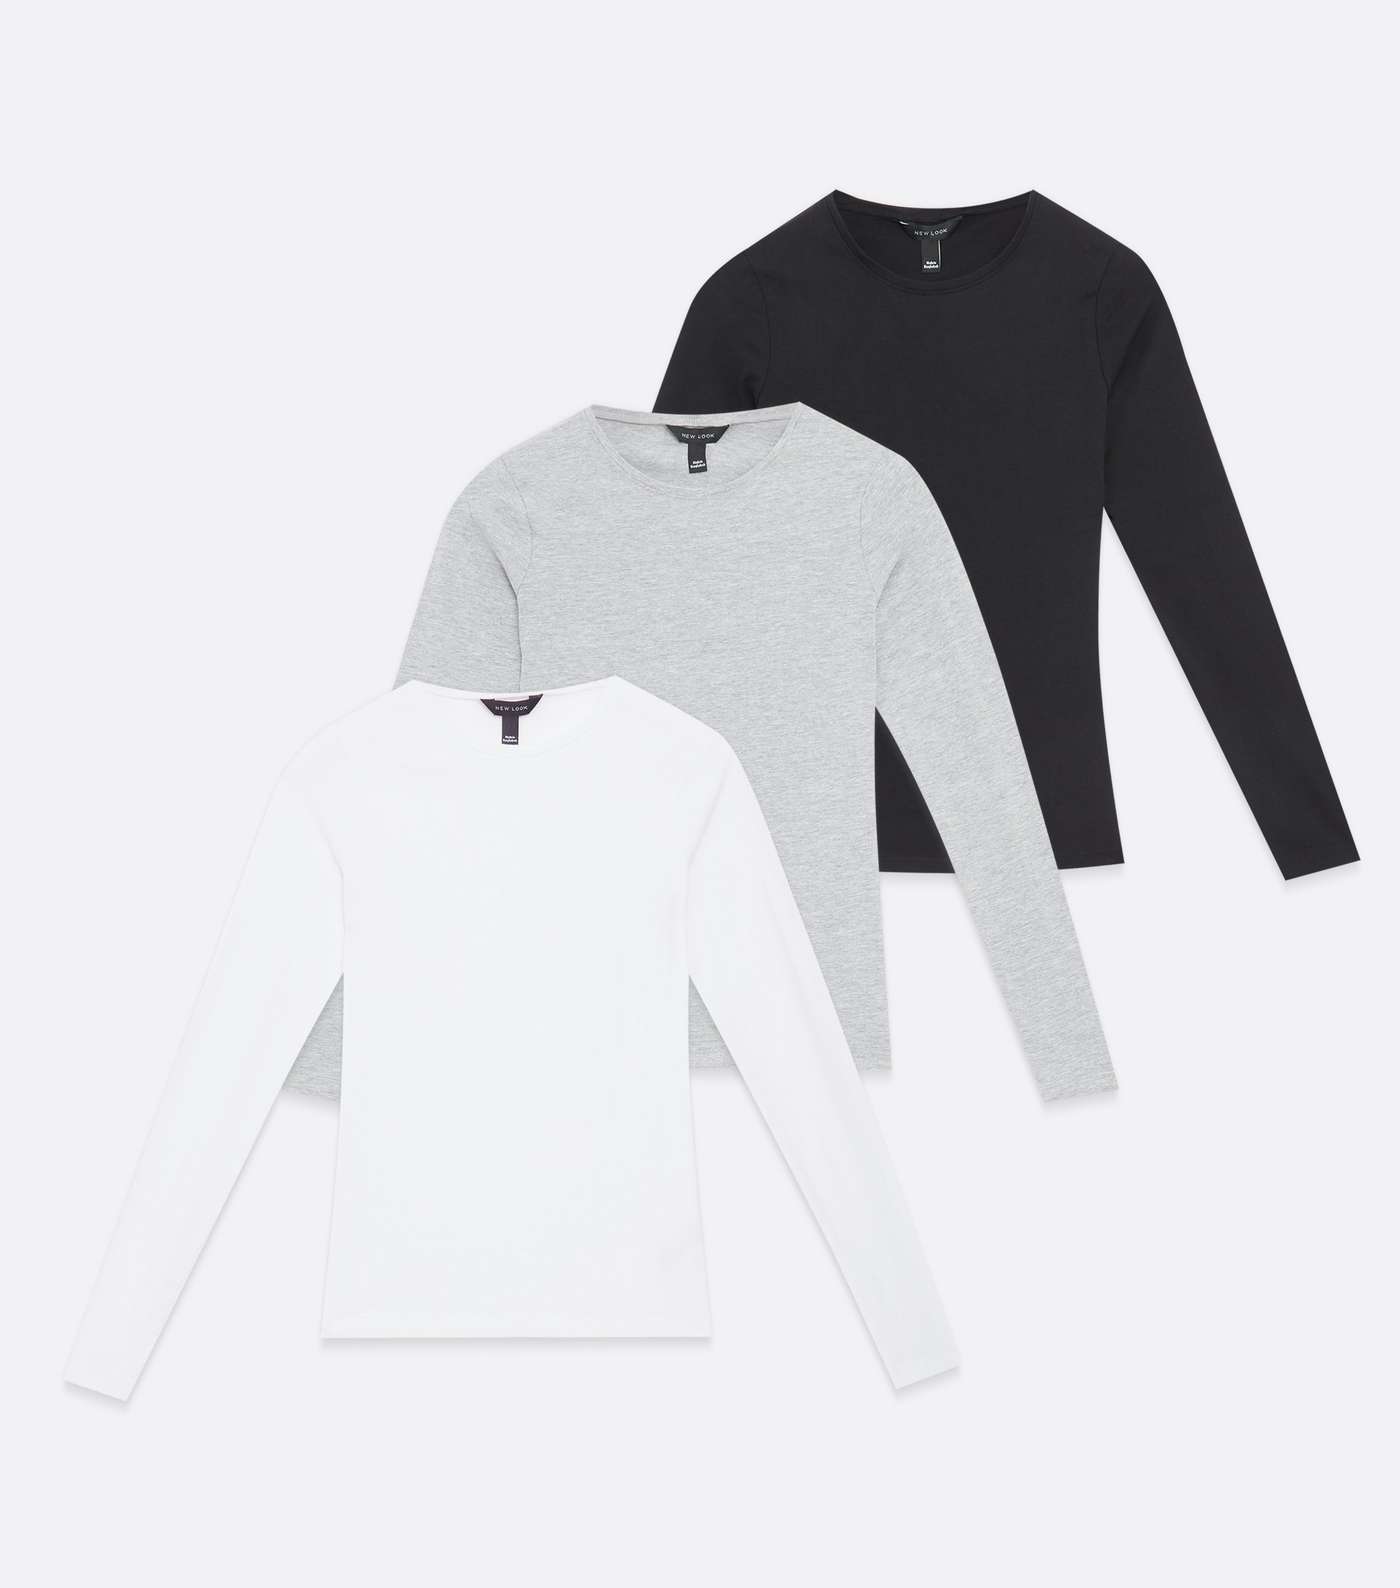 3 Pack Black Grey and White Long Sleeve Crew Tops Image 5